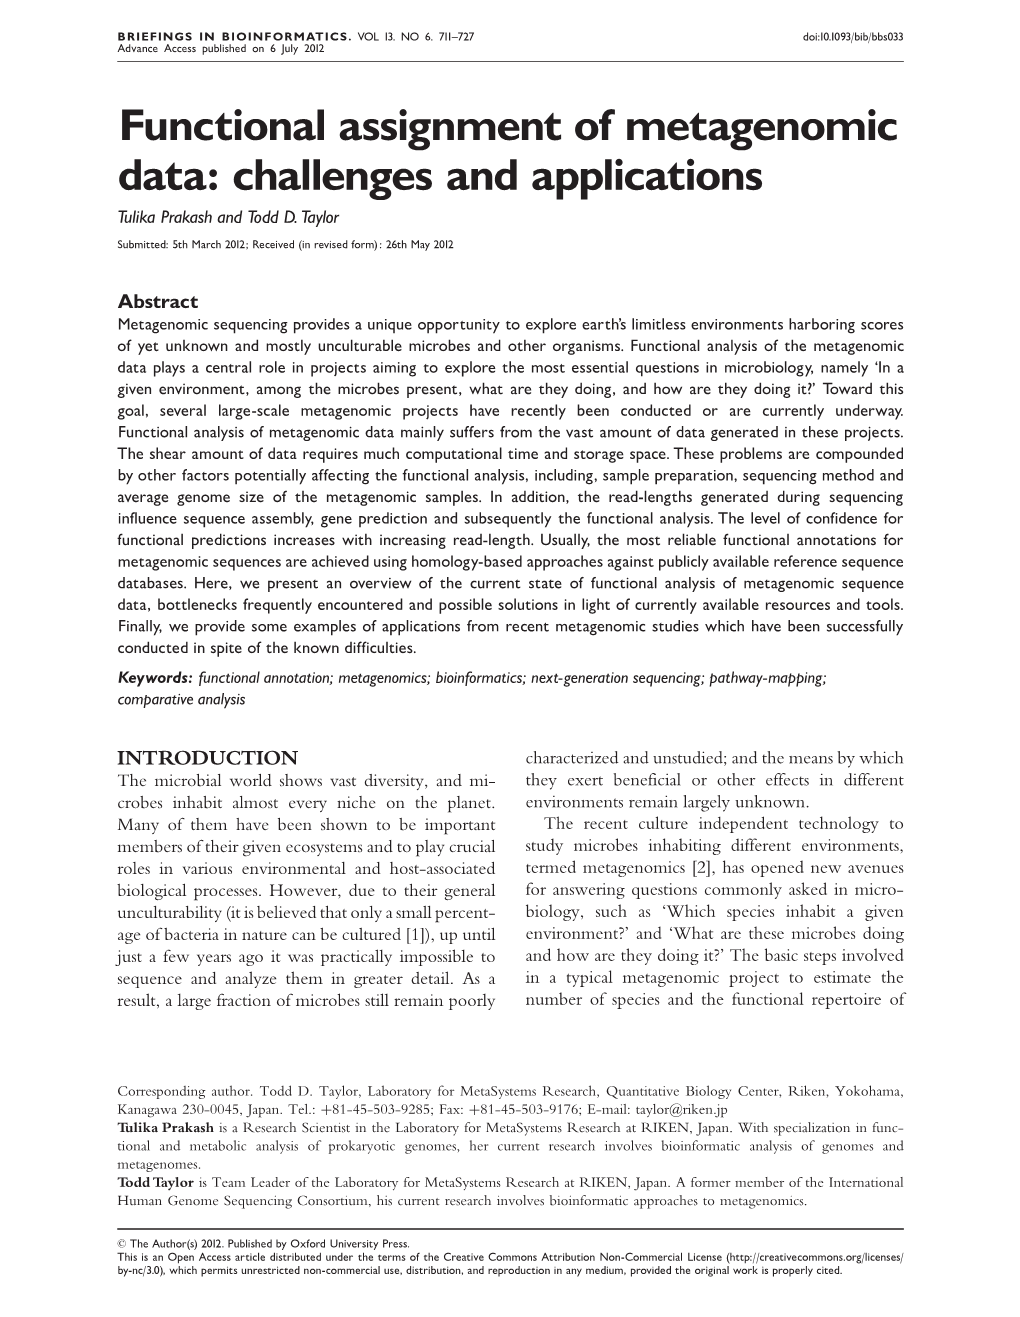 Functional Assignment of Metagenomic Data: Challenges and Applications Tuli Ka Pra Ka S H a N D to D D D